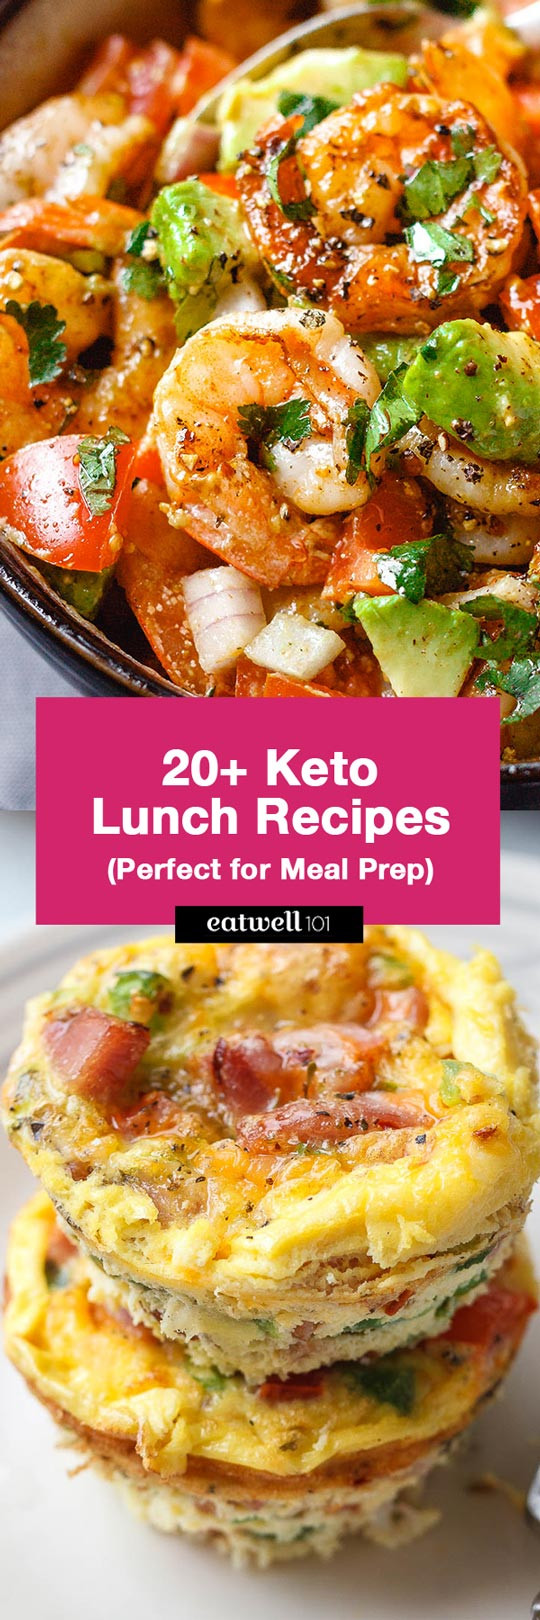 Keto Diet Recipes Lunches
 Keto Lunch Recipes 22 Best Keto Lunch Ideas for Meal Prep